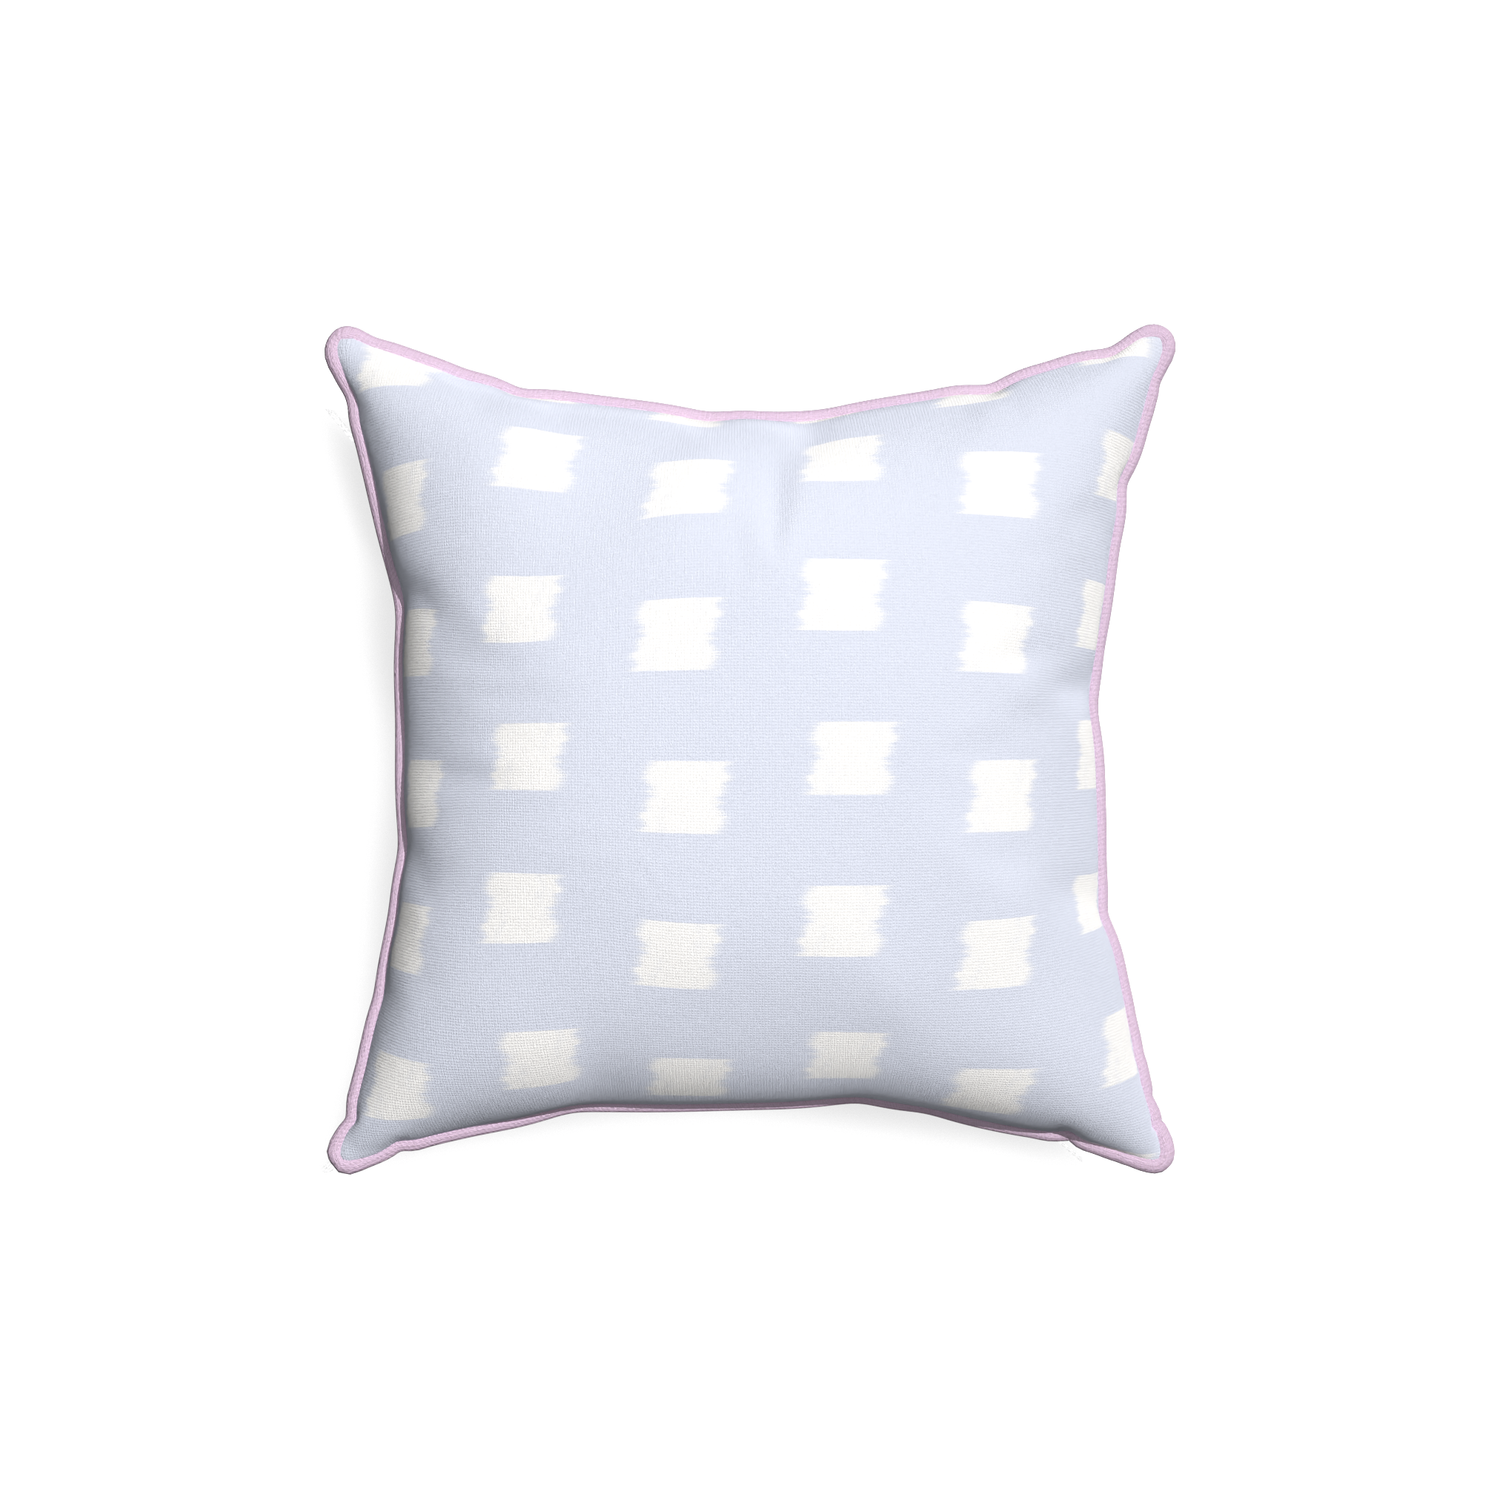 18-square denton custom sky blue patternpillow with l piping on white background